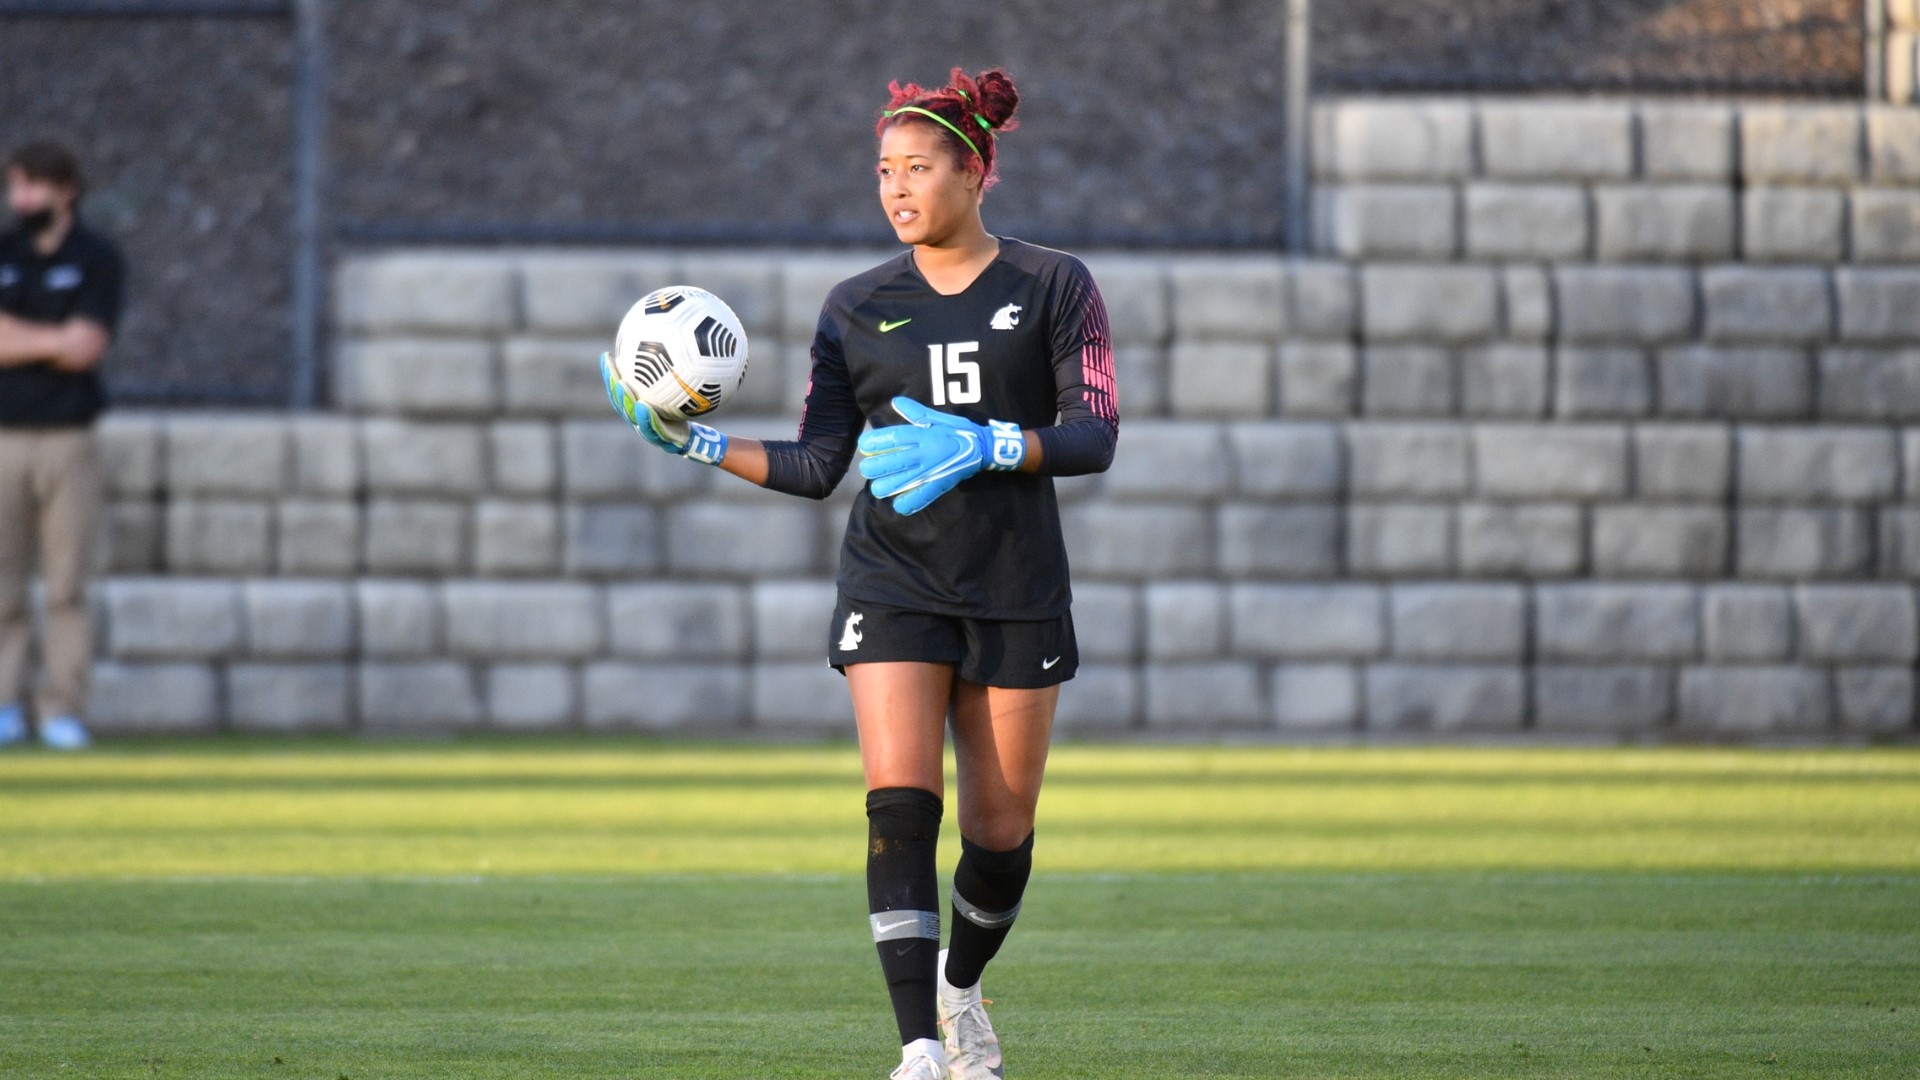 Cooper was named the Pac-12's Goalie of the Year and Freshman of the Year on Friday. Her success is even more astounding due to the grief she's been processing.